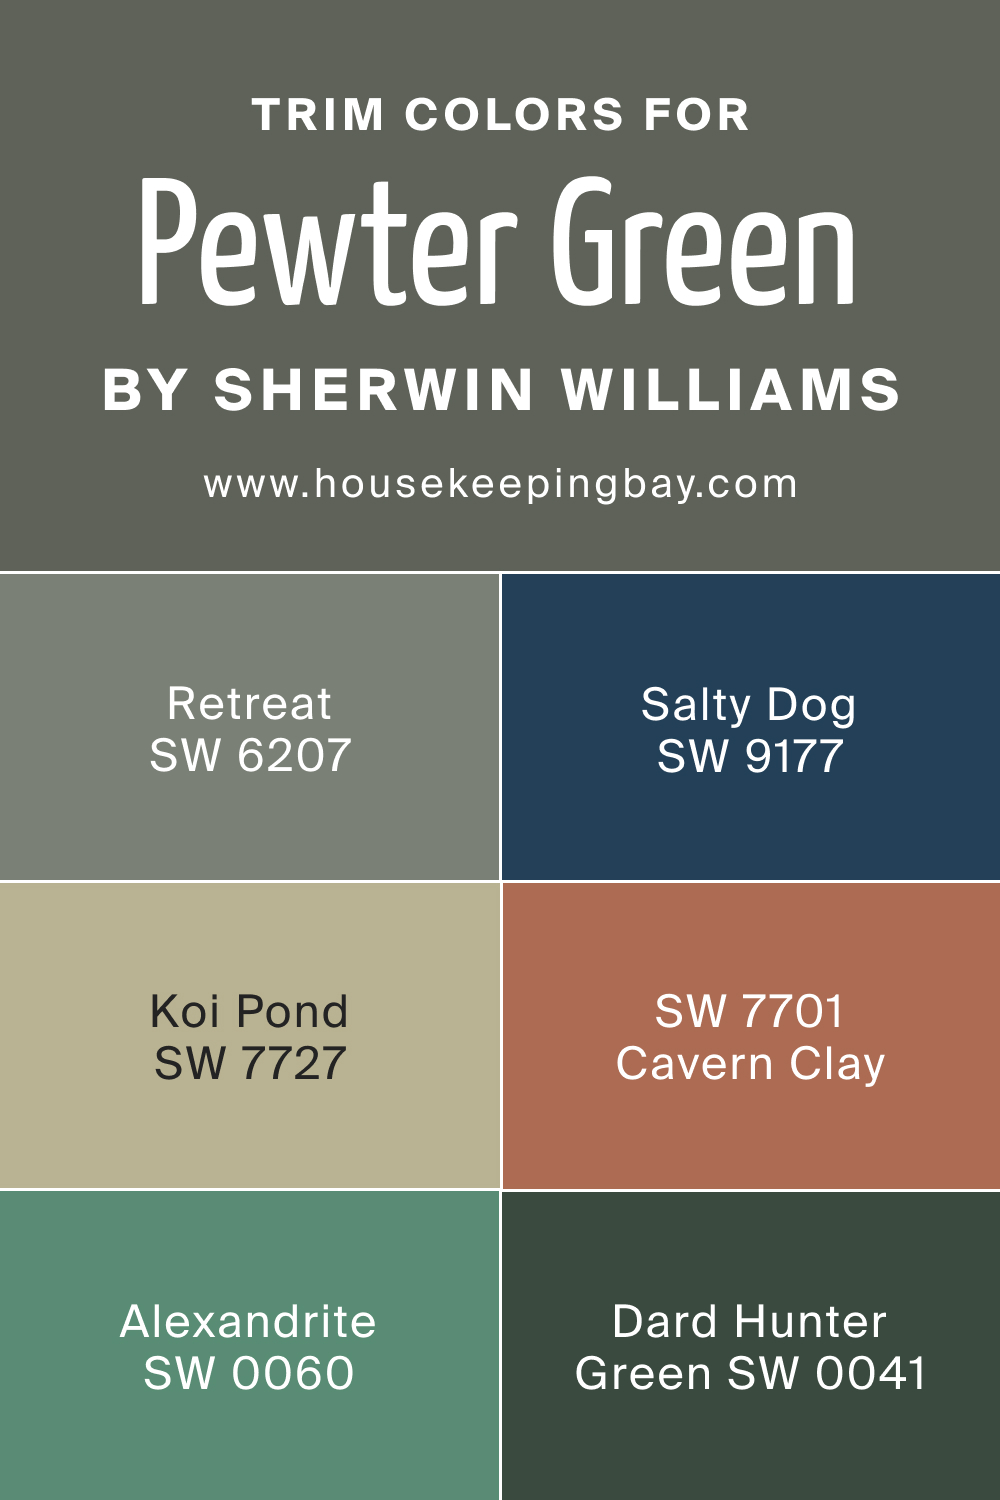 What Is the Best Trim Color of Pewter Green